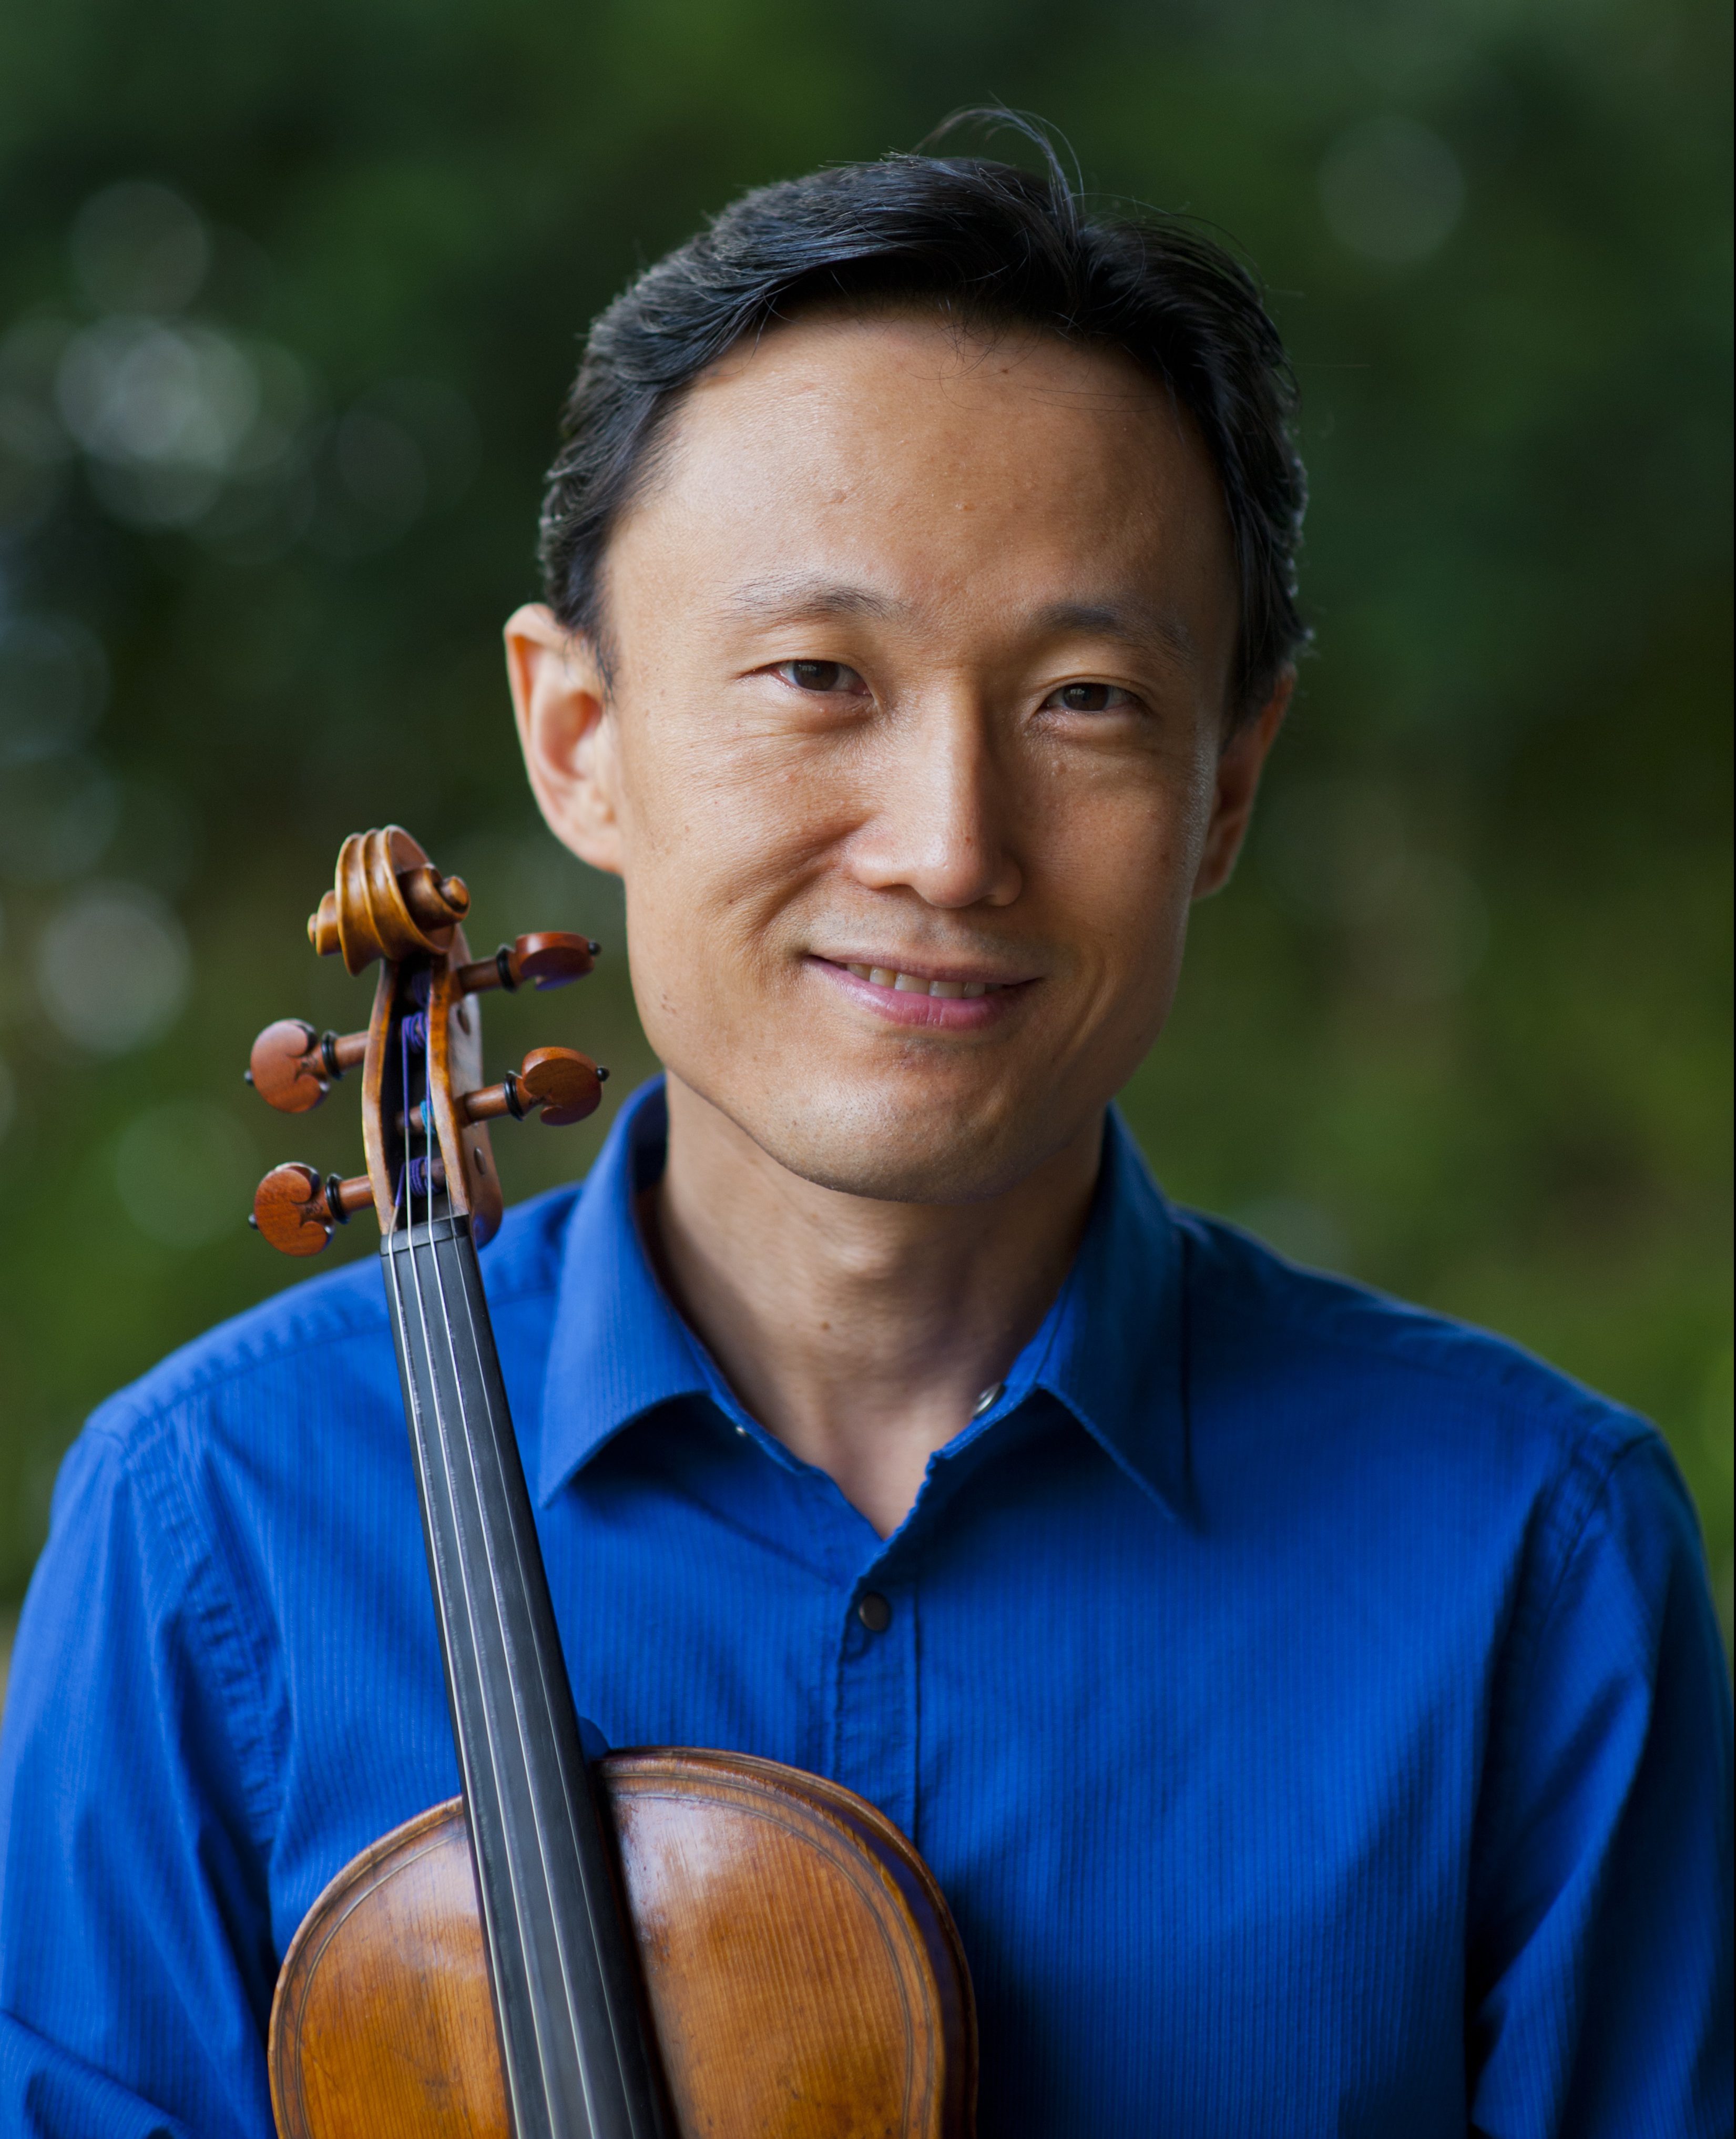 Hawaii Symphony Orchestra concertmaster, Ignace “Iggy” Jang (pictured) will appear on Thursday, April 6 at 11:00am in the UH West O’ahu Dining Hall, along with HSO bassist, John Gallagher, and Mililani High School’s String Ensemble, led by Director Bryan Hirata.